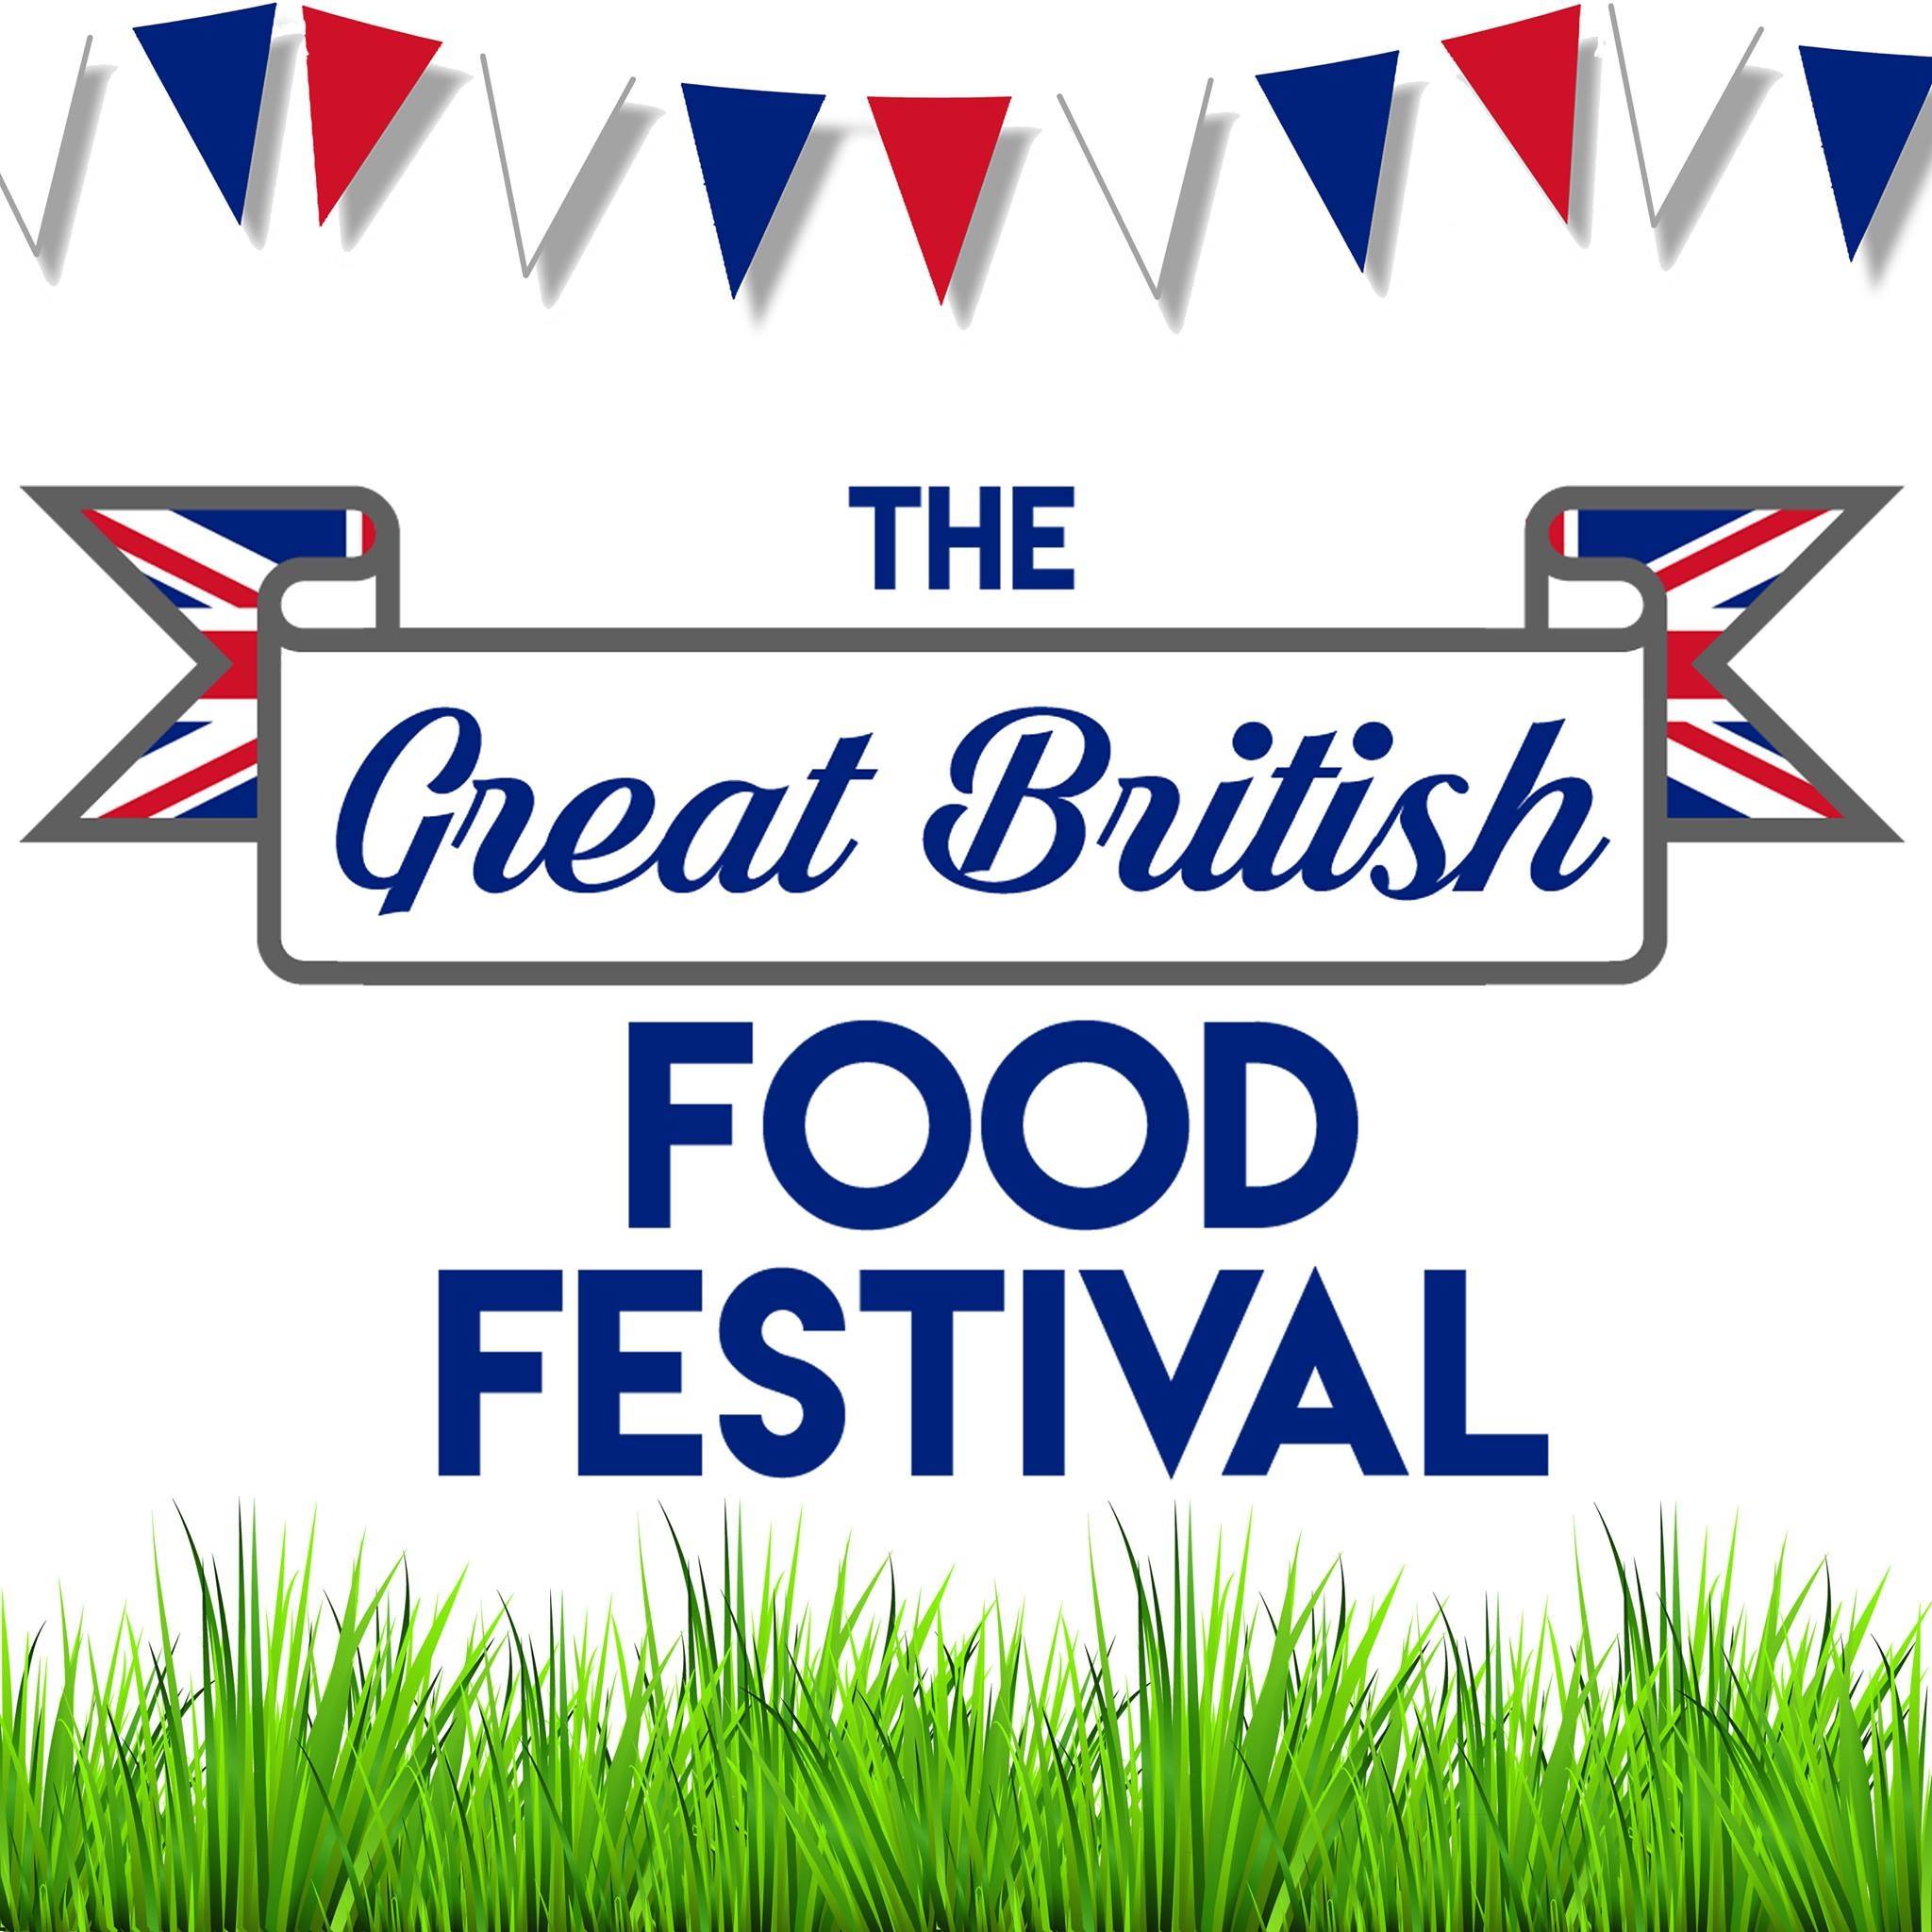 The Great British Food Festival 14th-15th September